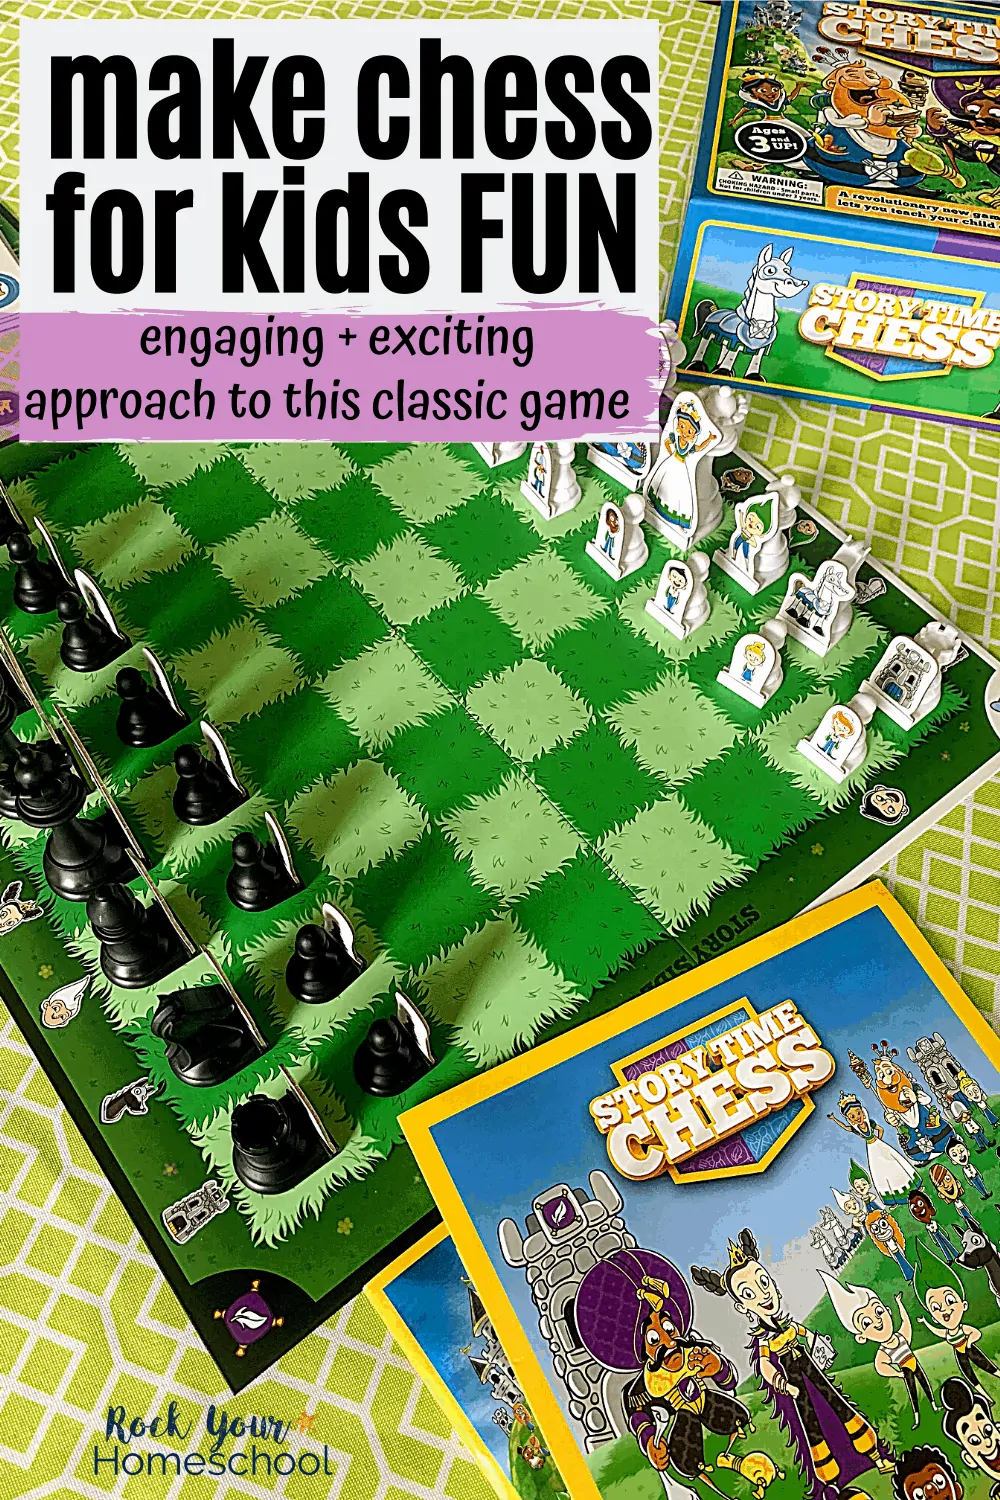 An Exciting & Easy Way to Make Chess for Kids Fun